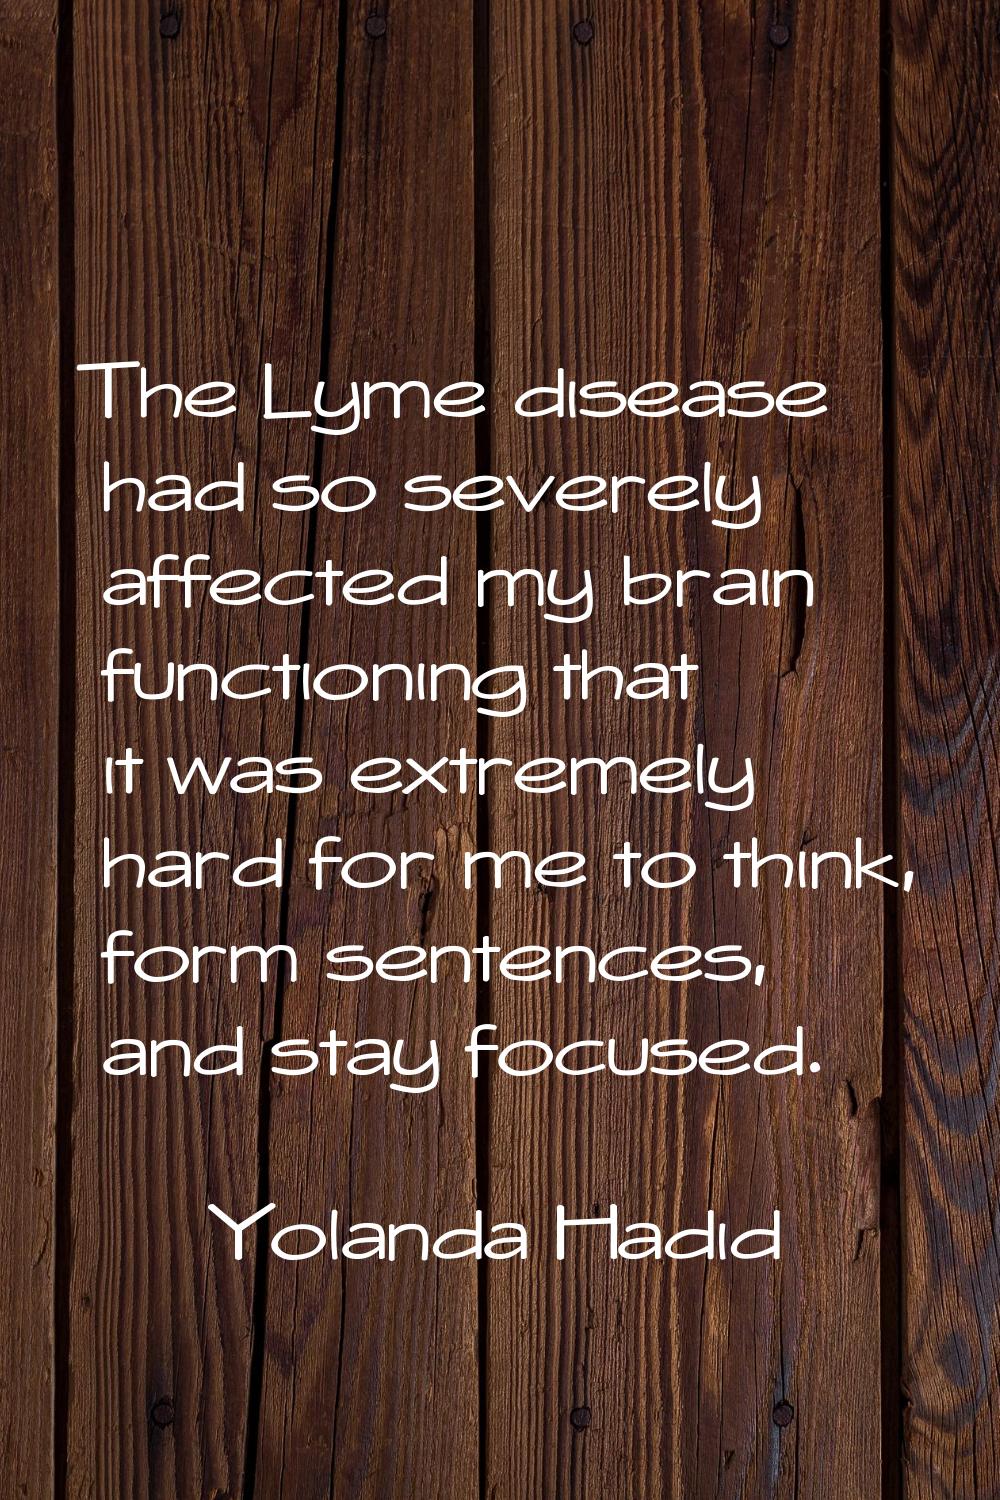 The Lyme disease had so severely affected my brain functioning that it was extremely hard for me to